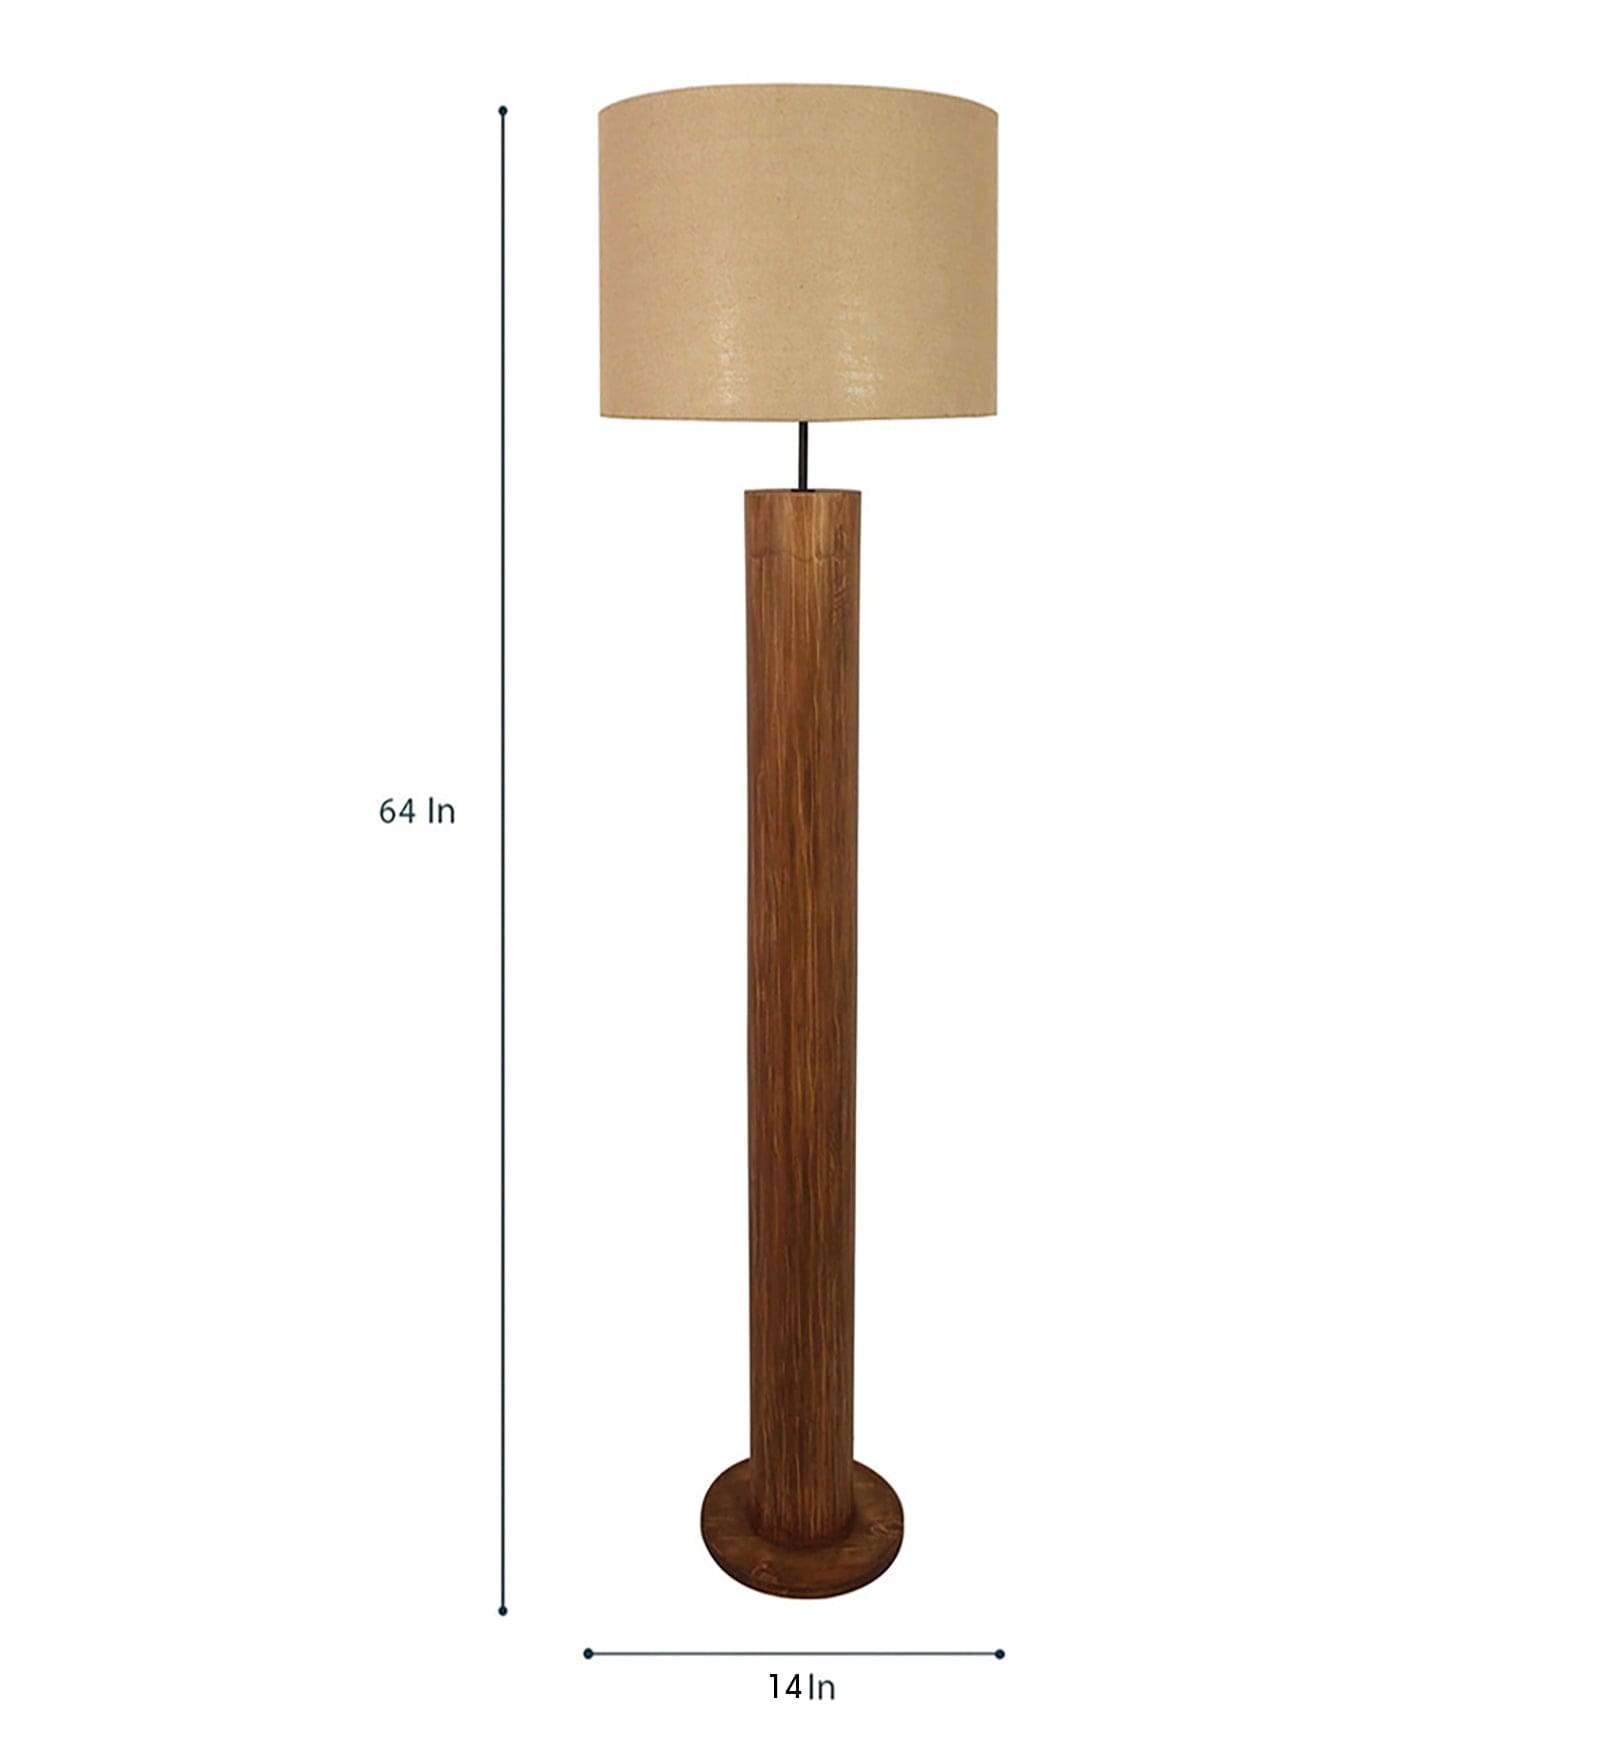 Cedar Wooden Floor Lamp with Premium Beige Fabric Lampshade (BULB NOT INCLUDED)